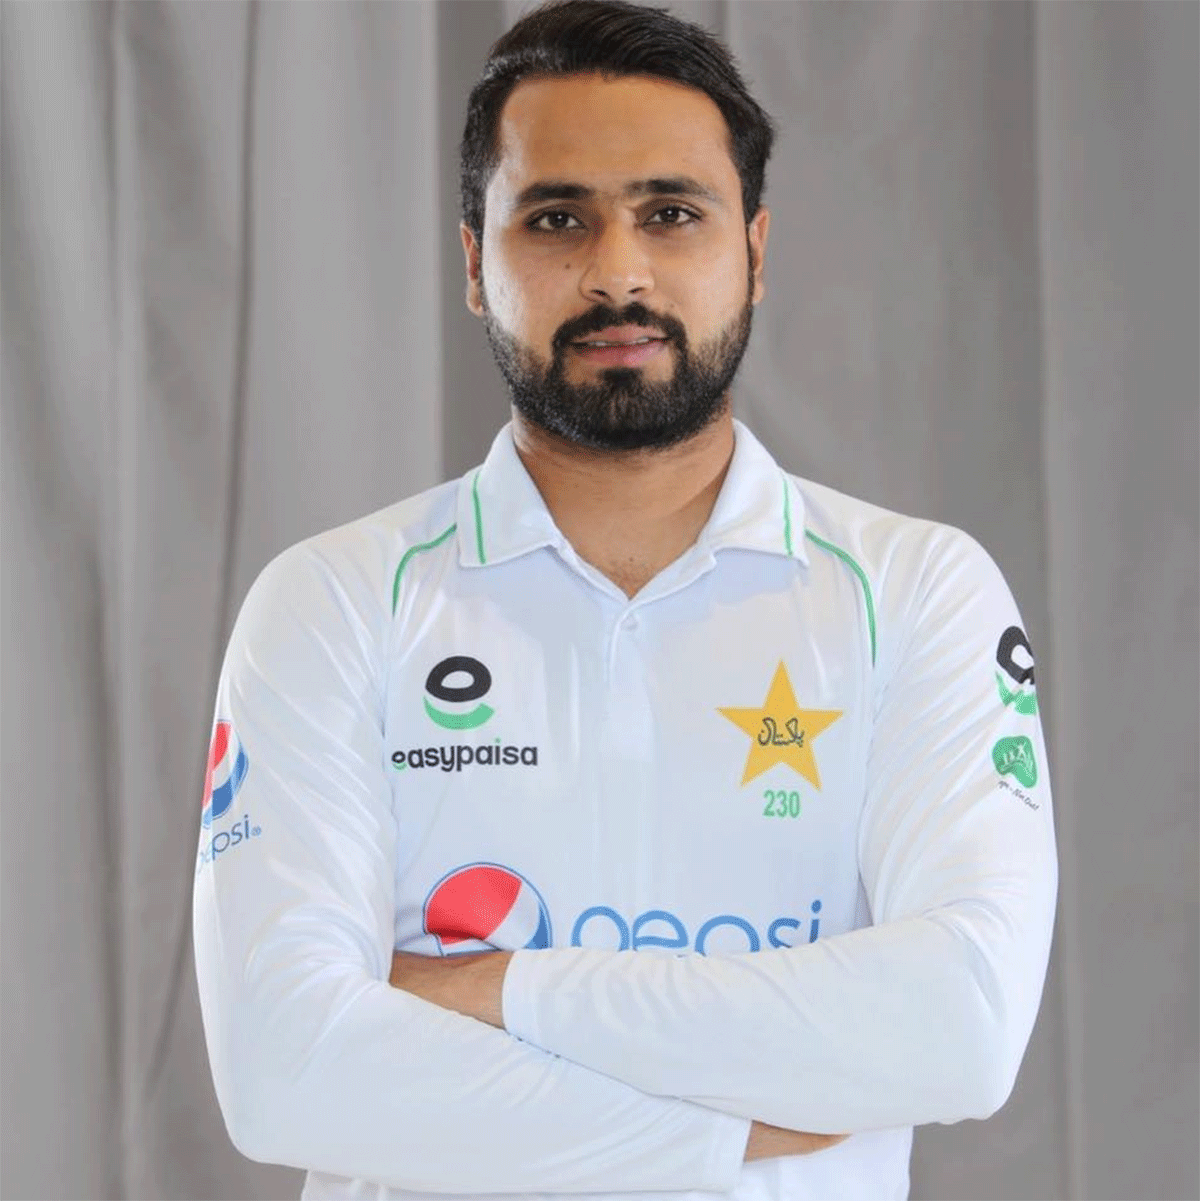 All-rounder Faheem Ashraf had tested positive for COVID on arrival at the team hotel, throwing his participation into doubt. The second Test starts on Saturday.